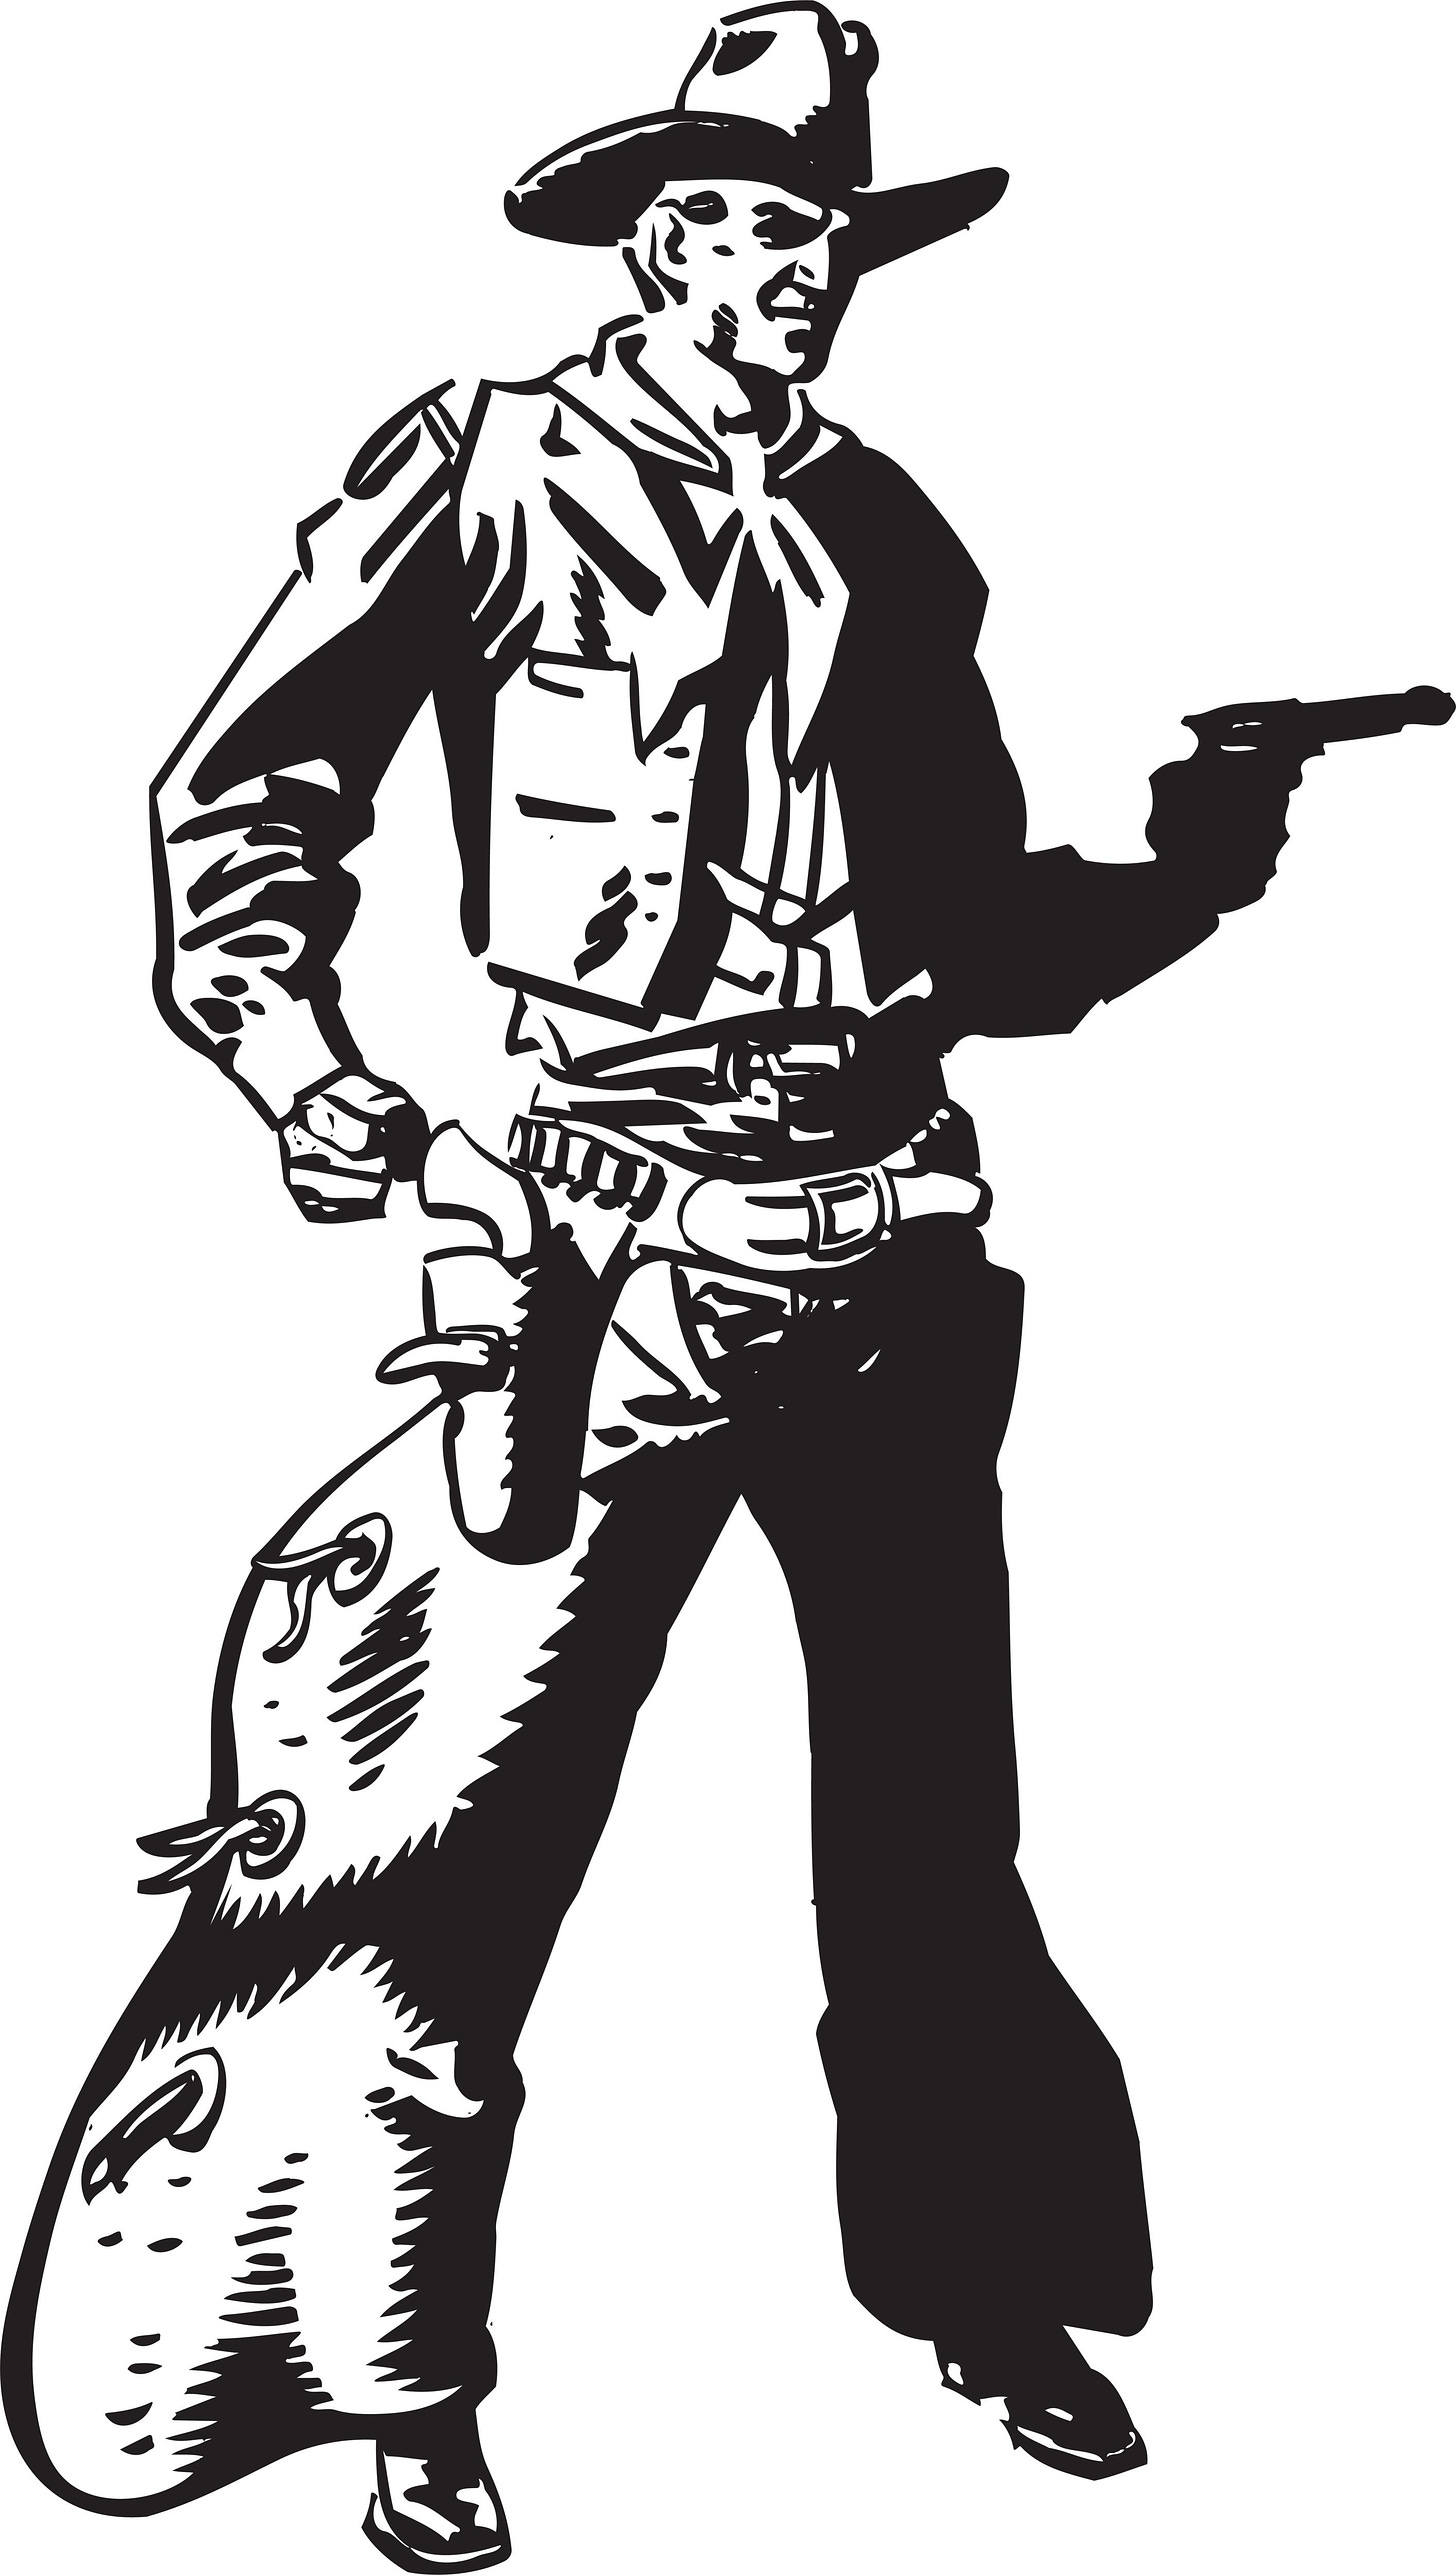 Black-and-white cartoon sketch of a cowboy standing in a wide stance, face scowling, right fist clenched and pistol drawn.